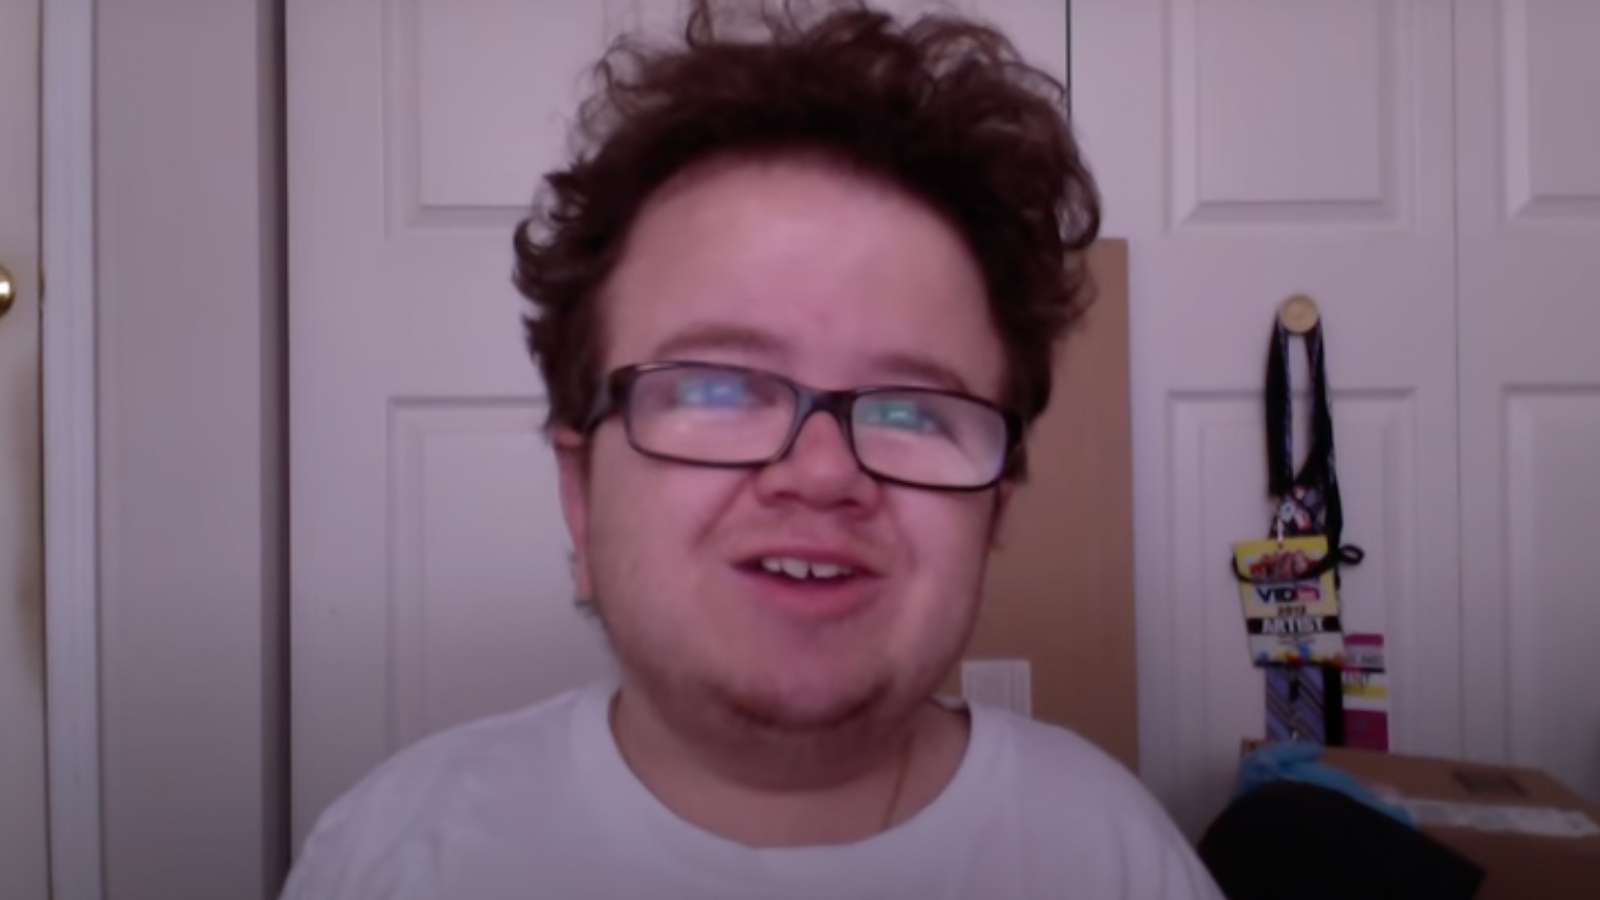 Keenan Cahill in a YouTube video